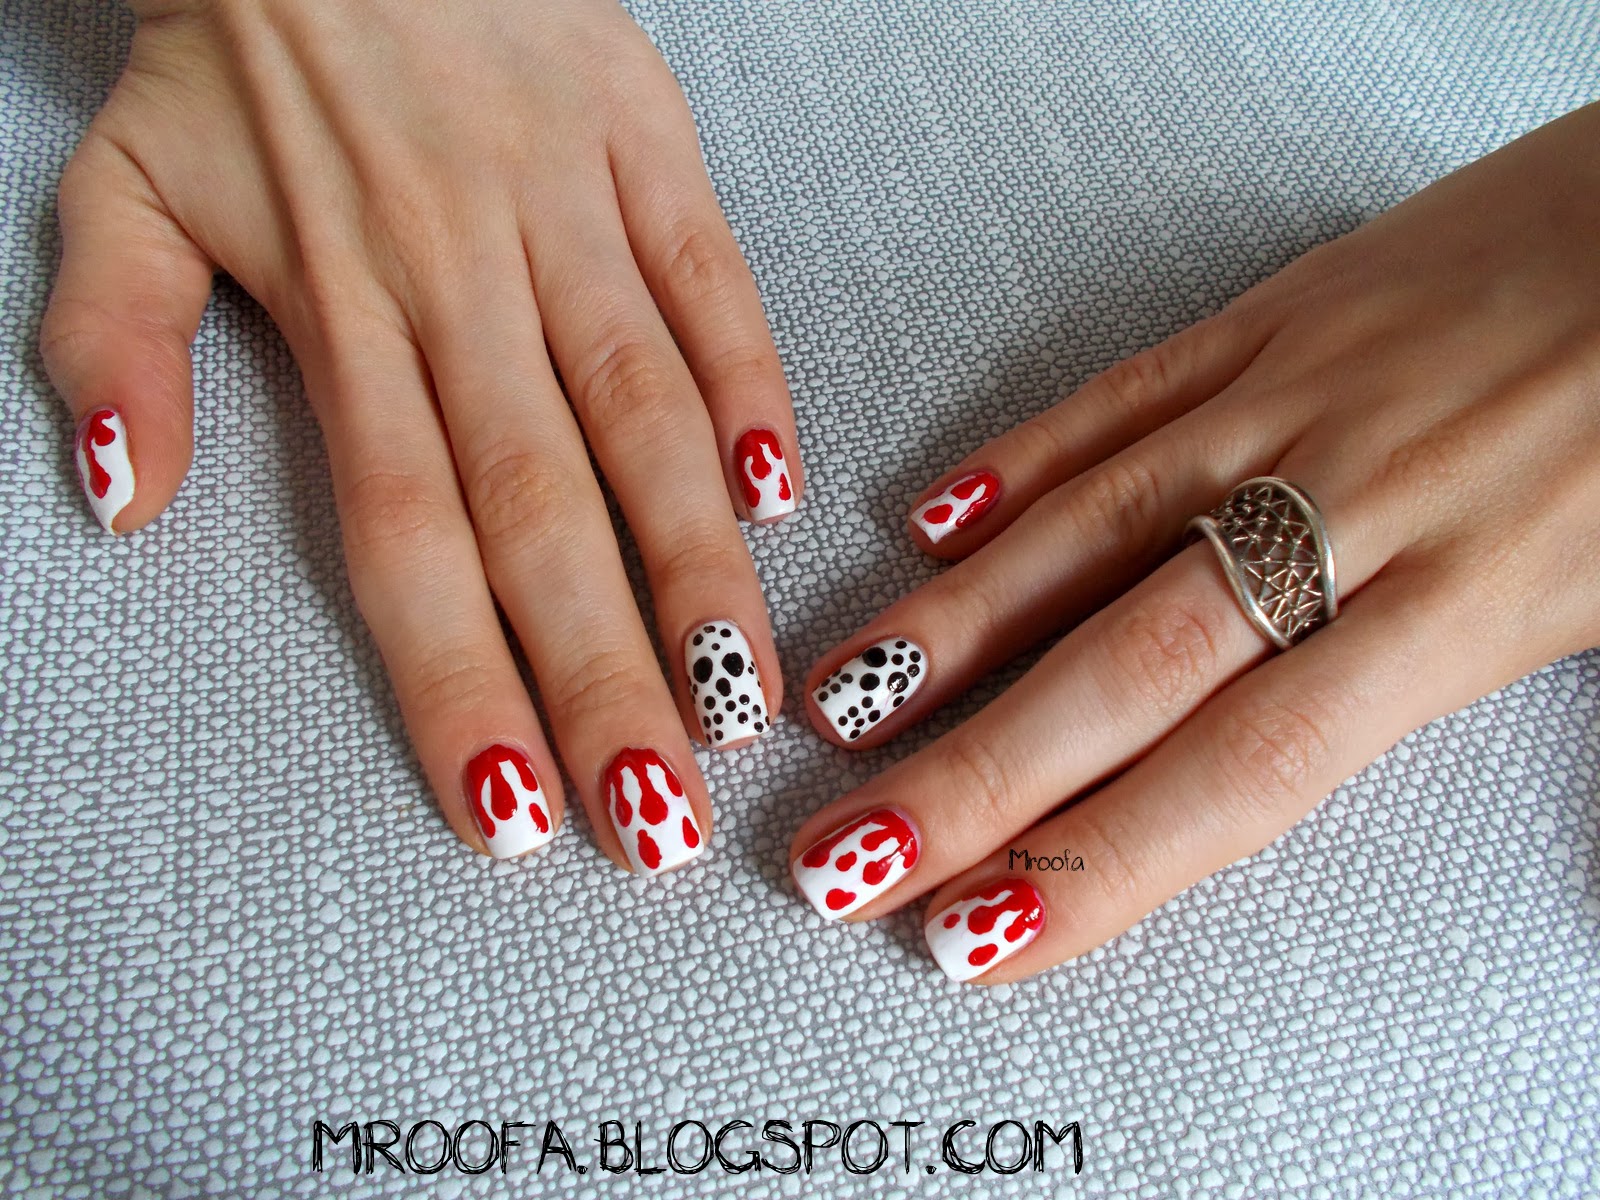 5. "Friday the 13th" Nail Art - wide 4